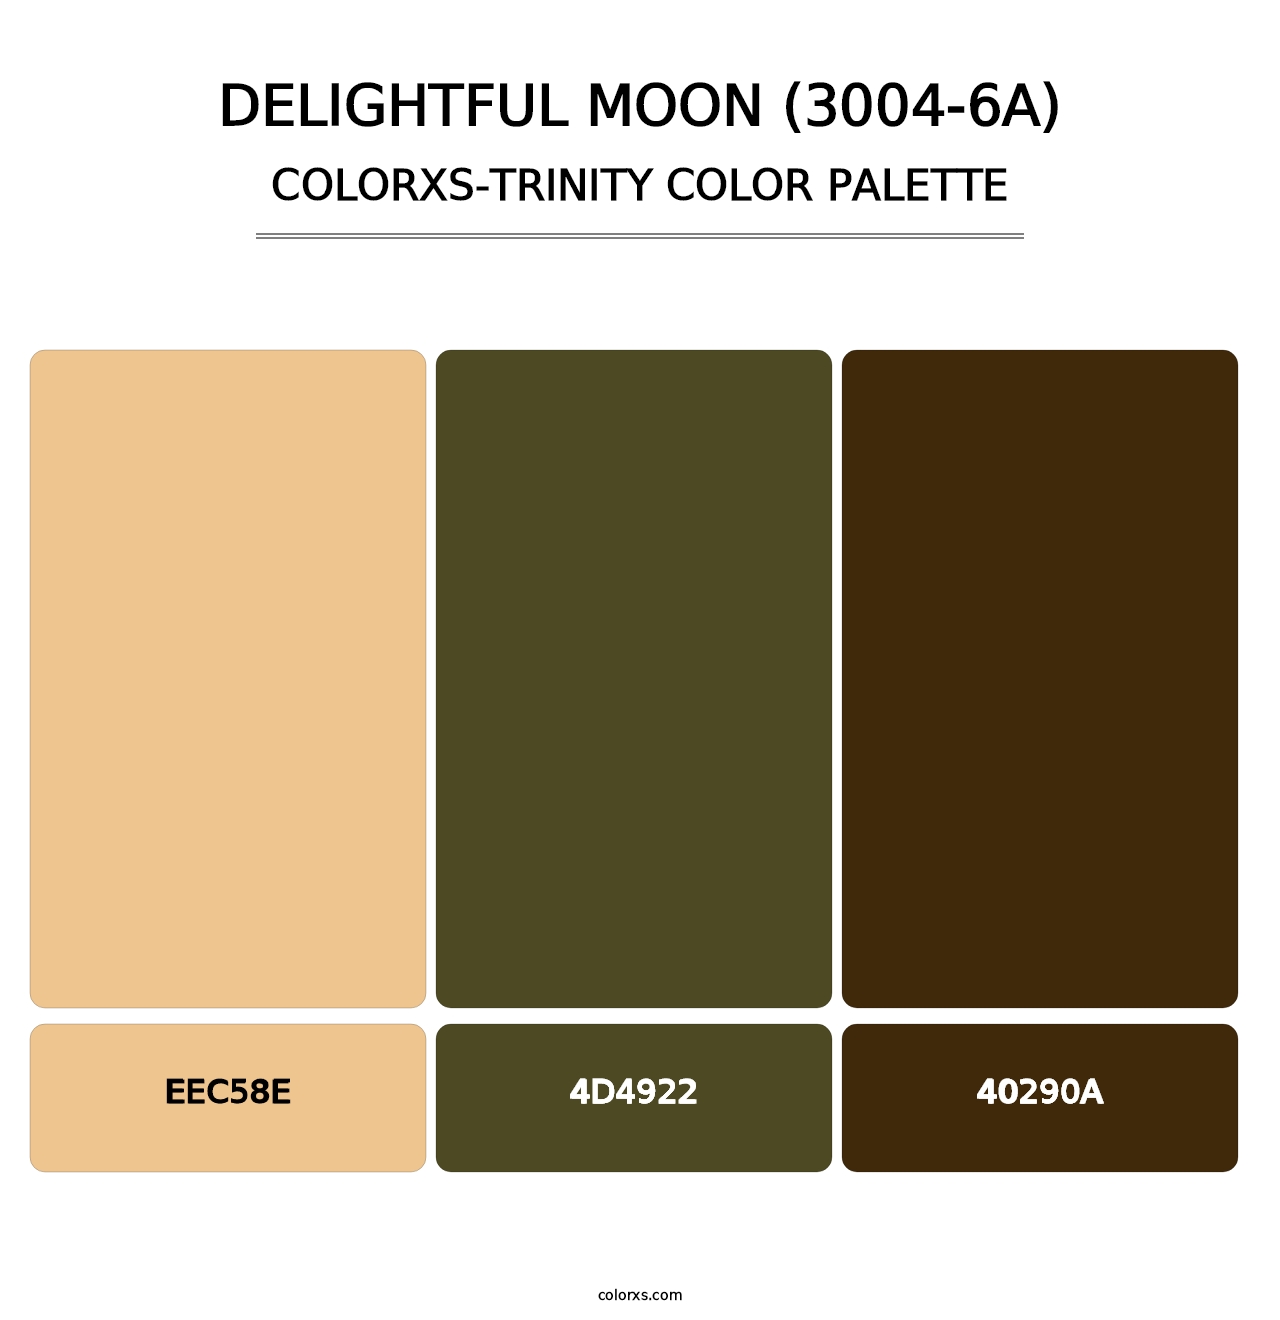 Delightful Moon (3004-6A) - Colorxs Trinity Palette